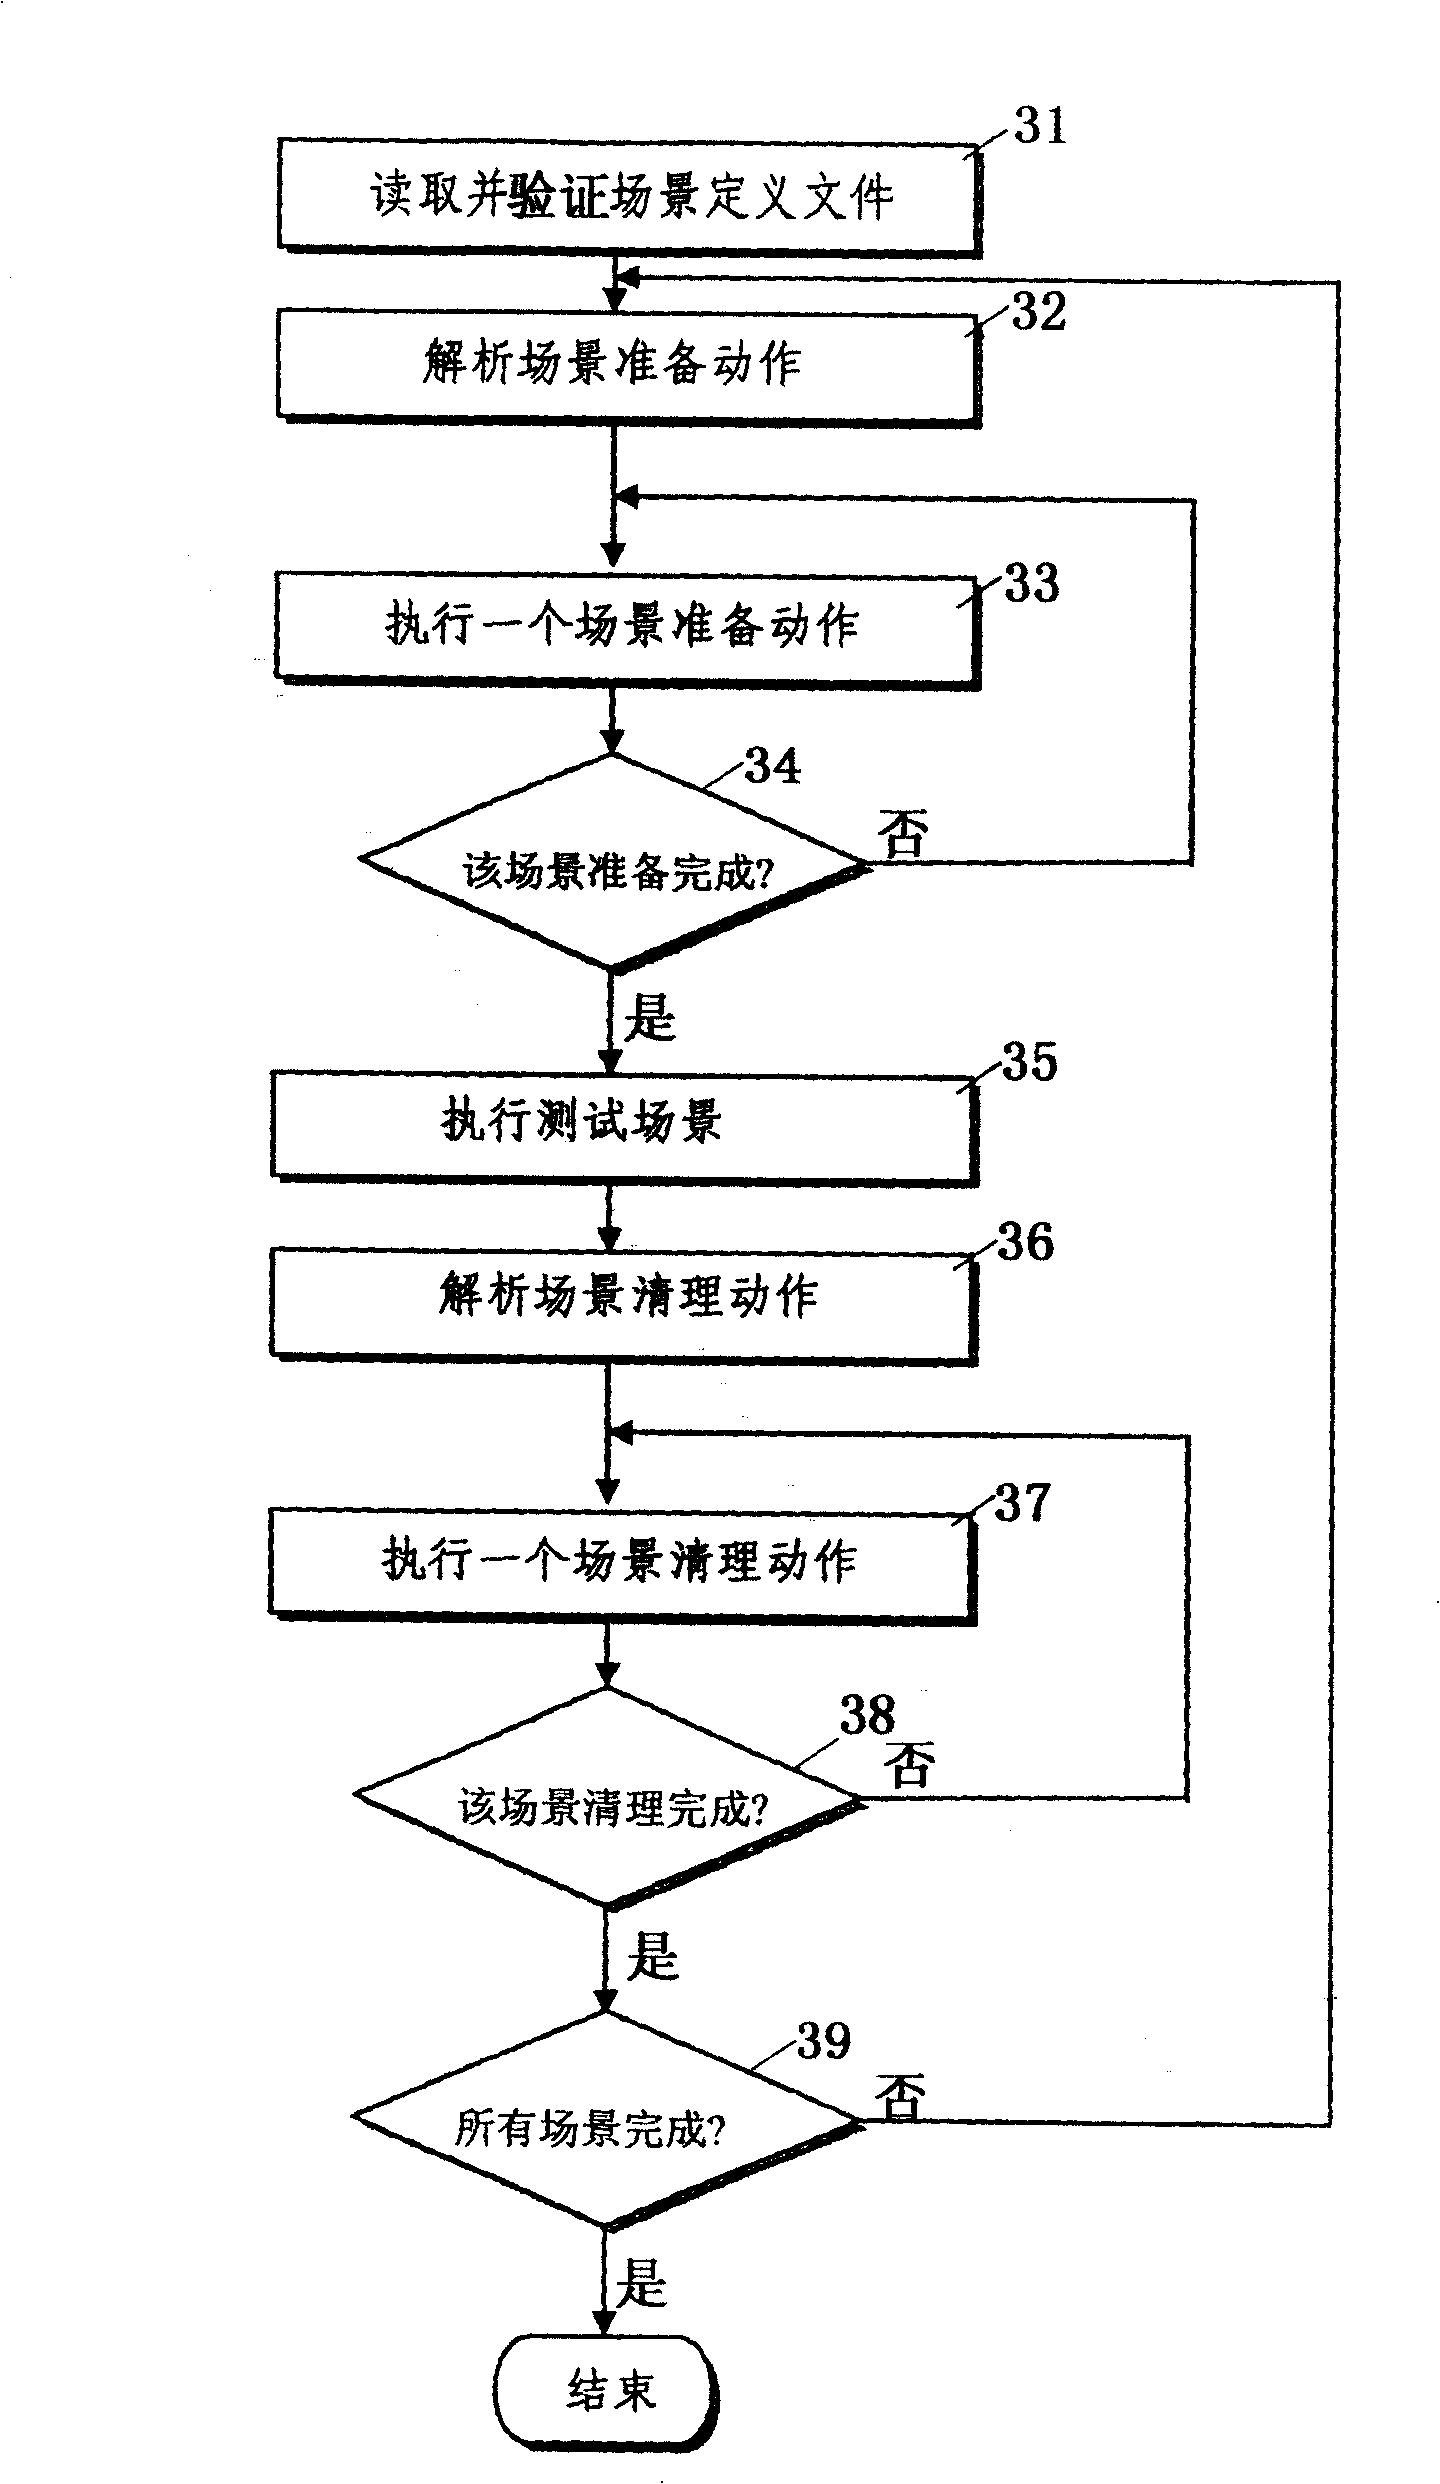 Multi- test scene automatic dispatch system and method